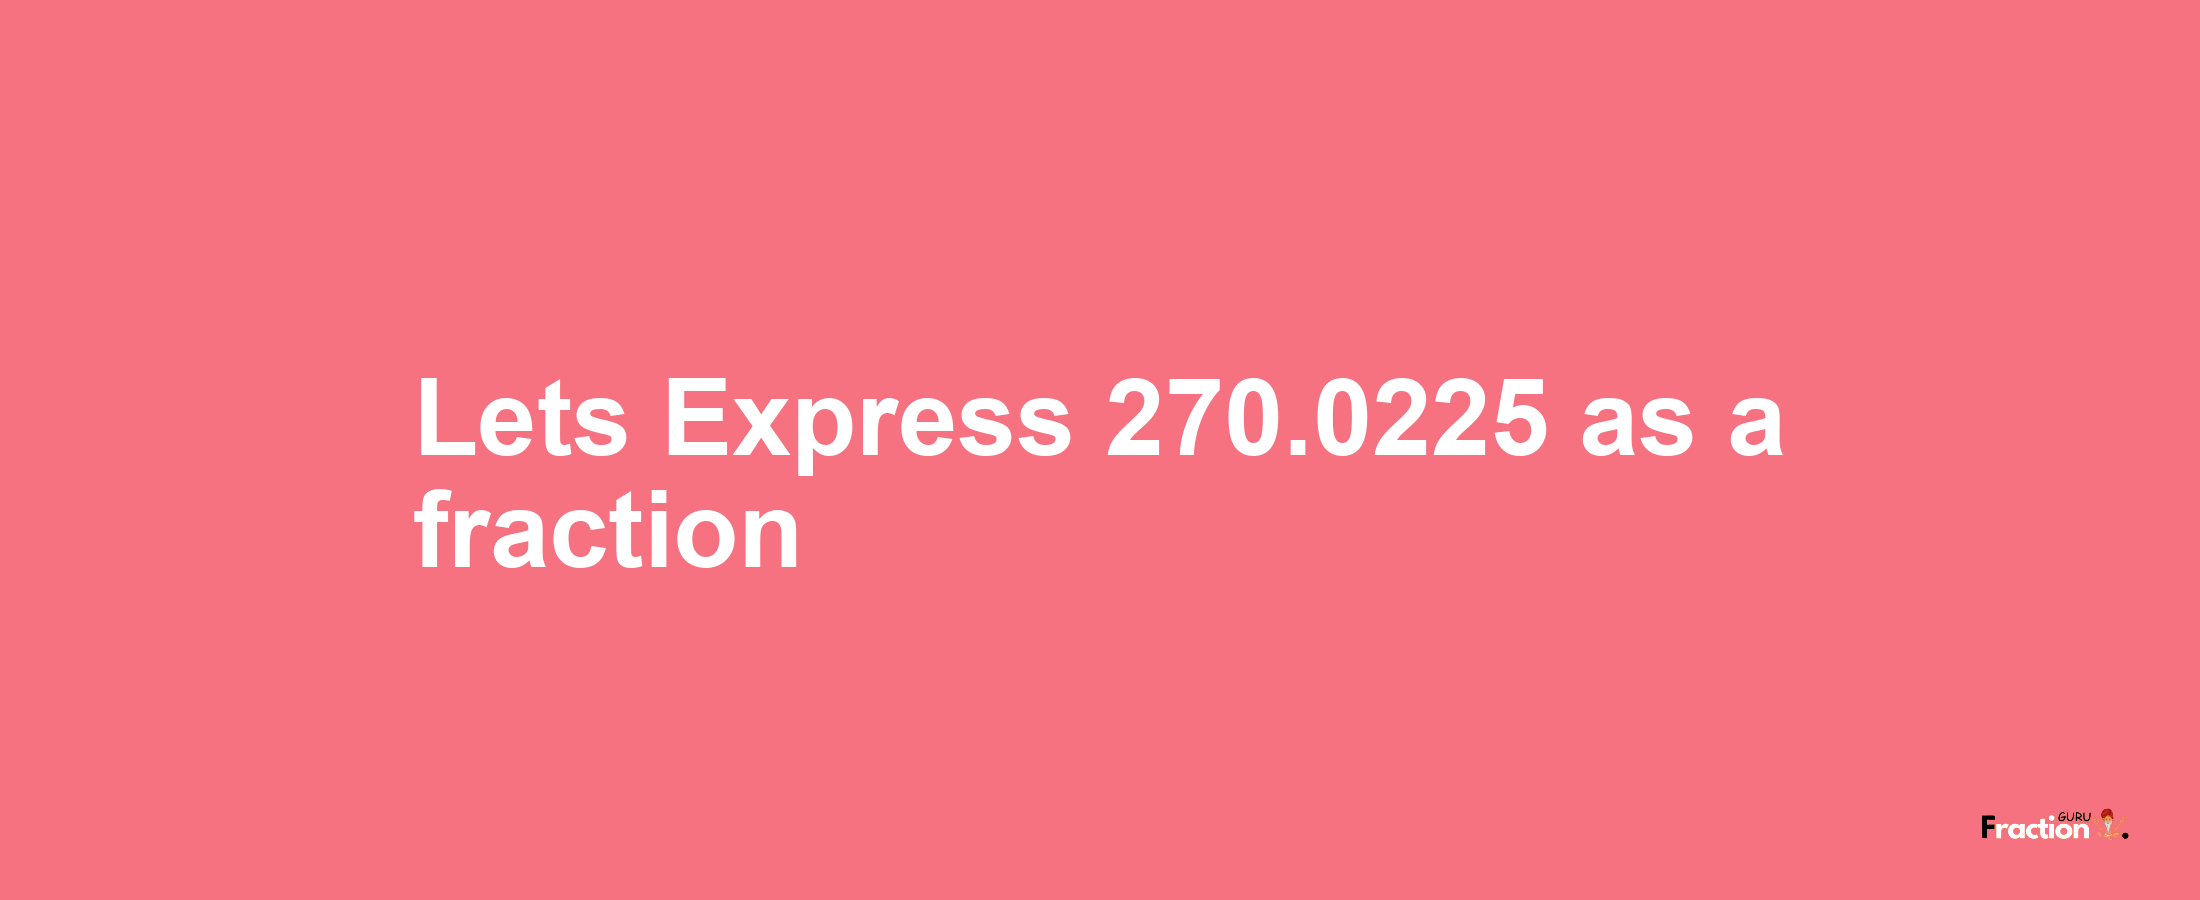 Lets Express 270.0225 as afraction